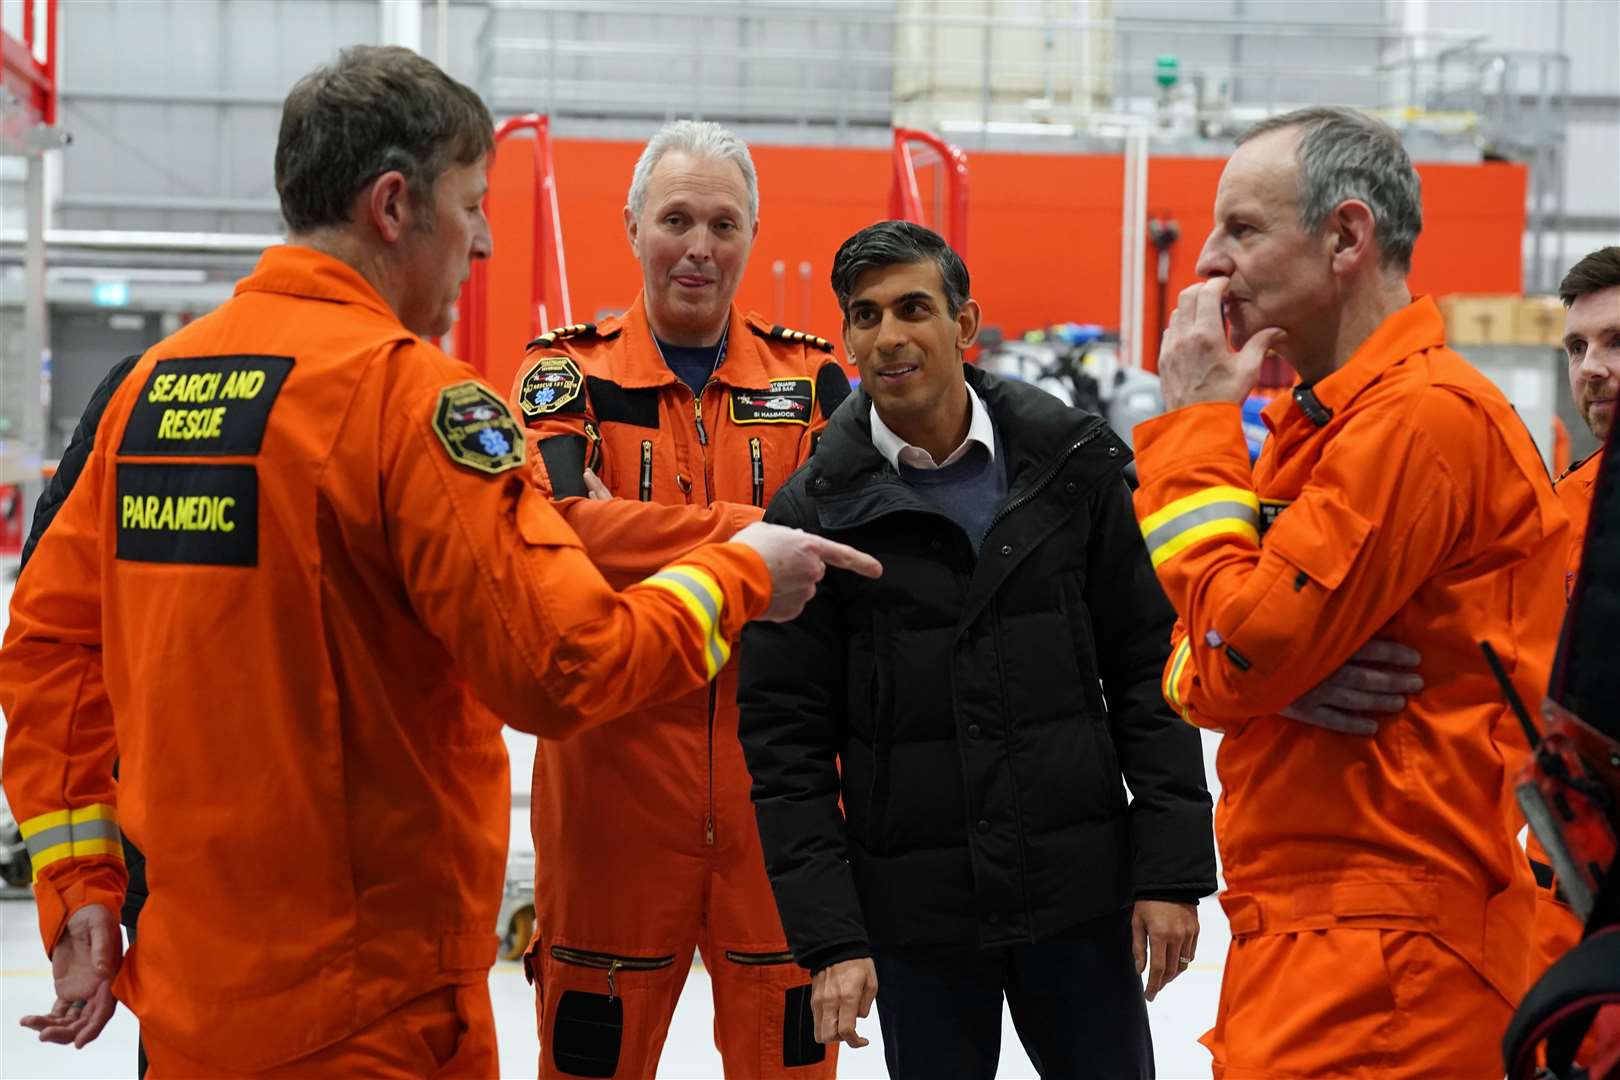 Prime Minister Rishi Sunak visited the Coastguard search and rescue base at Inverness Airport (Andrew MIlligan/PA)